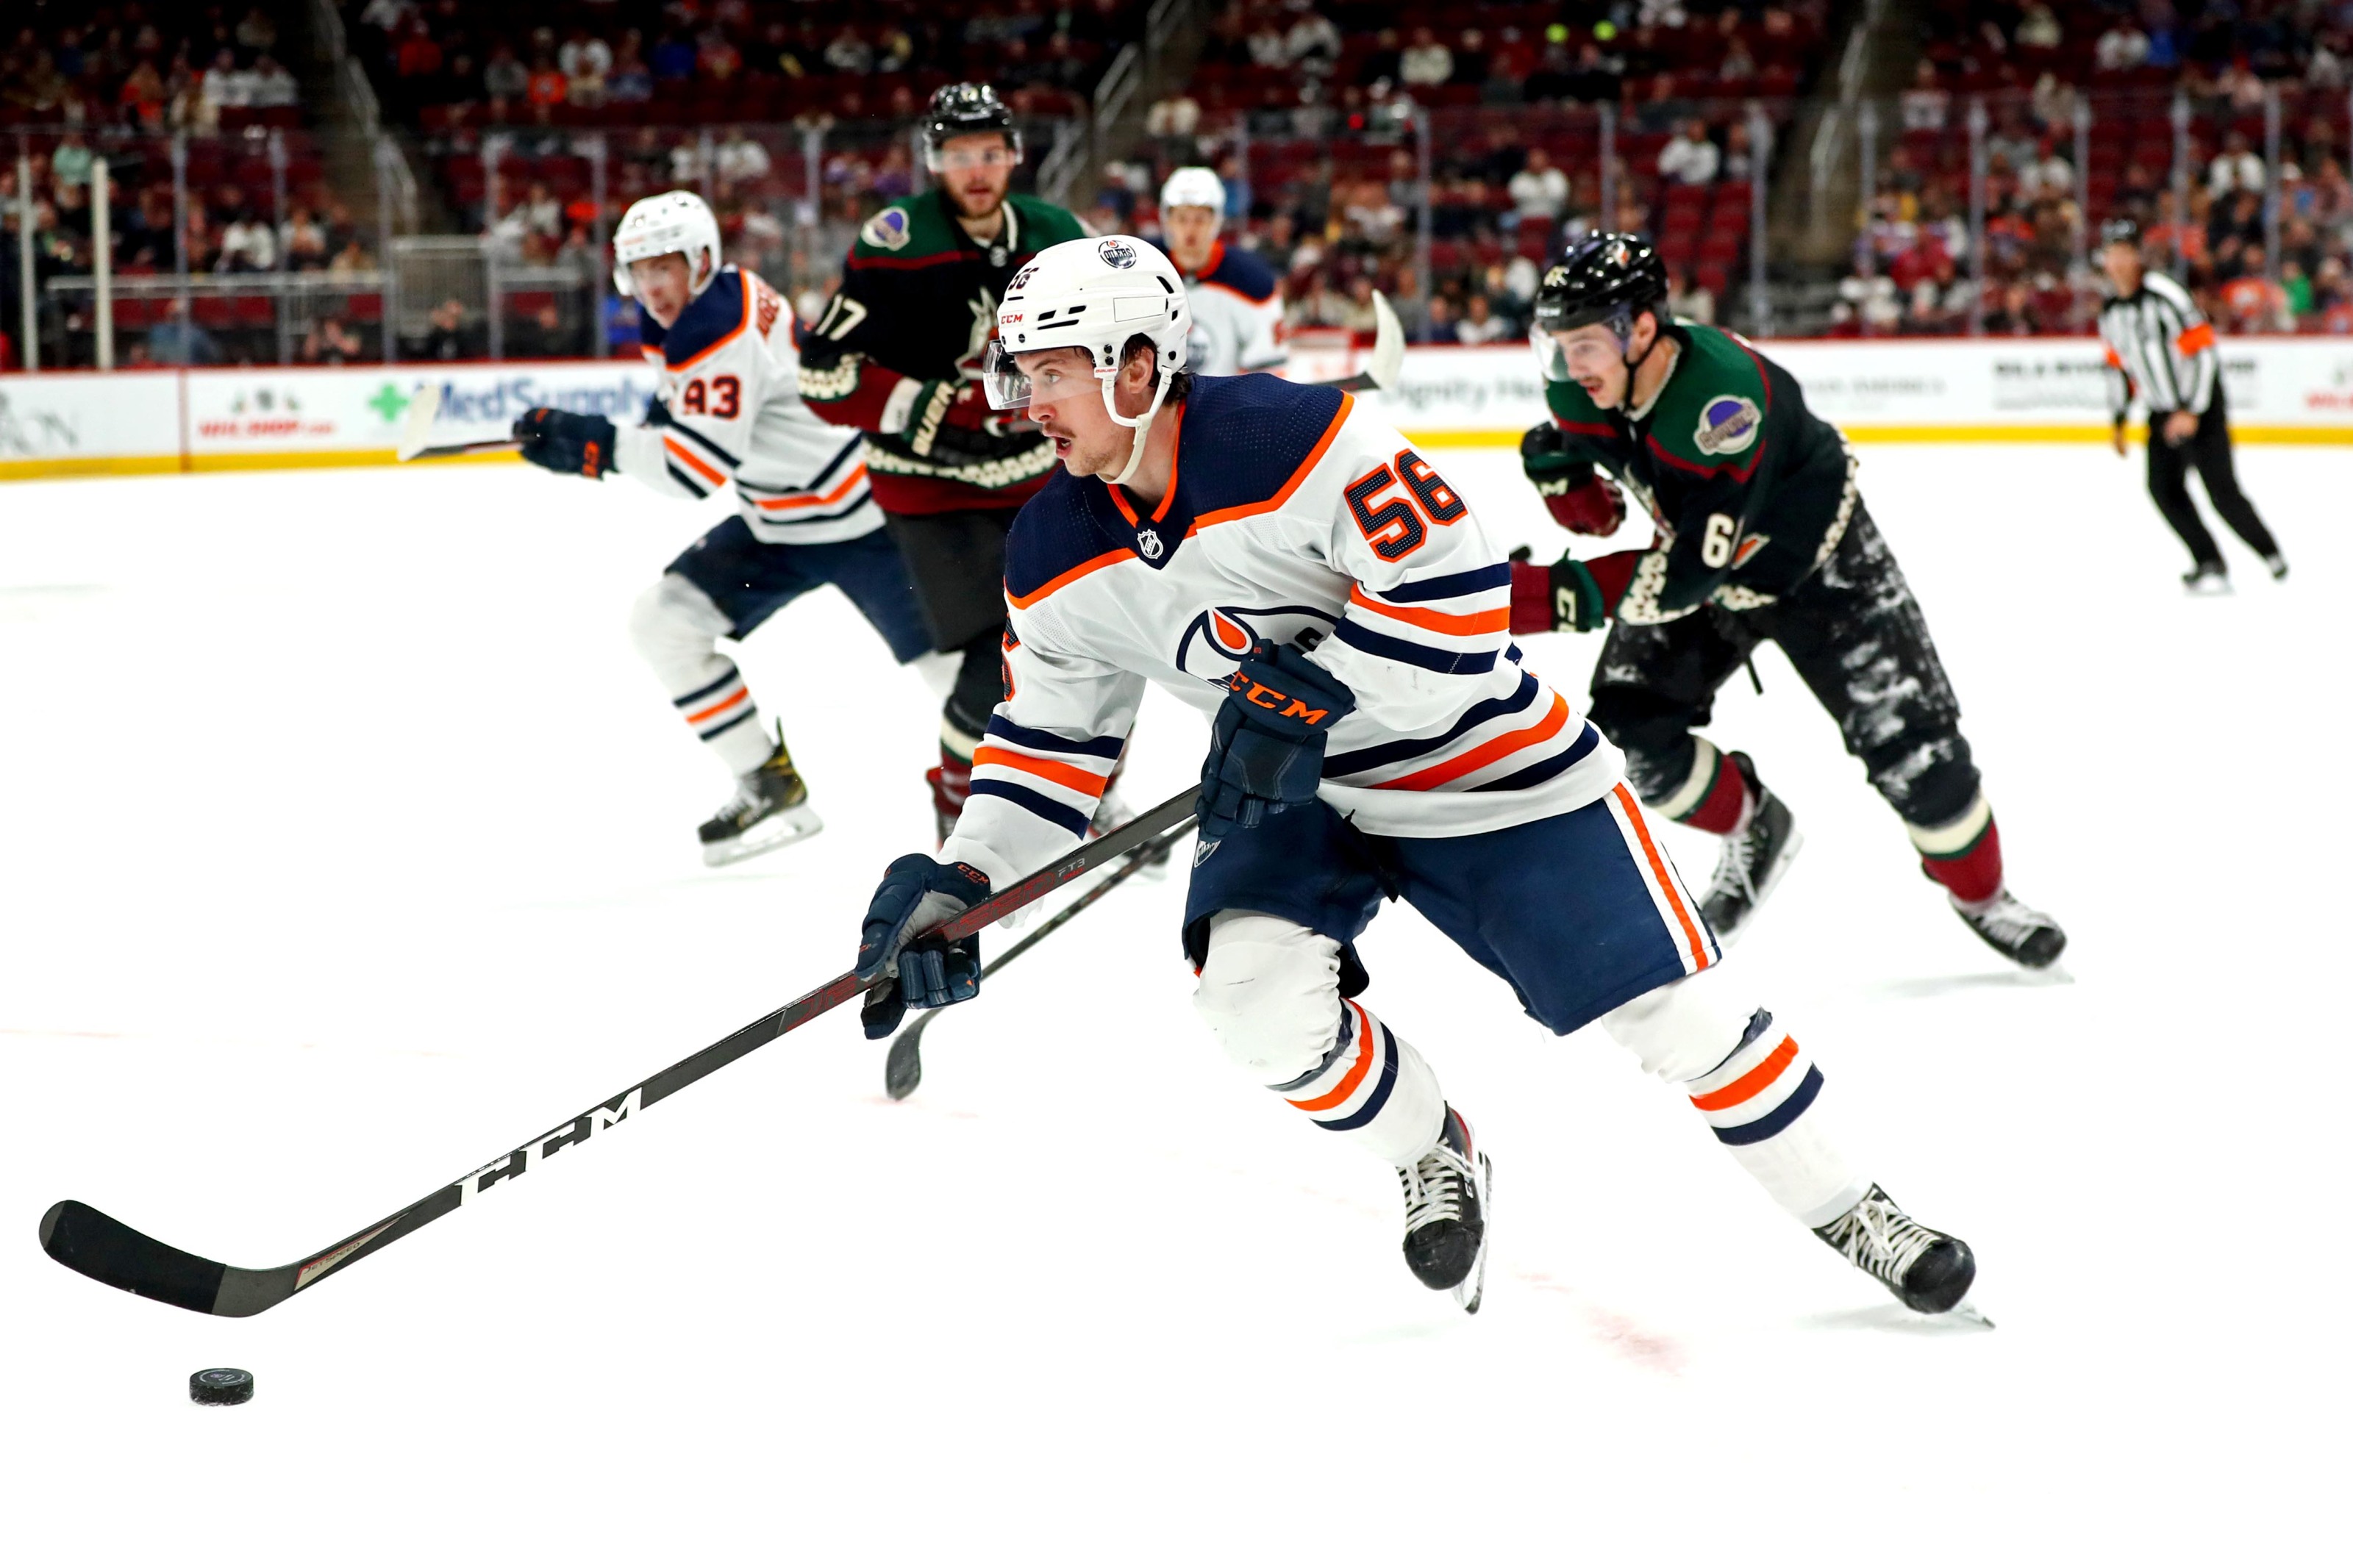 Edmonton Oilers Vs Coyotes Date, Time, Streaming, Betting Odds, More